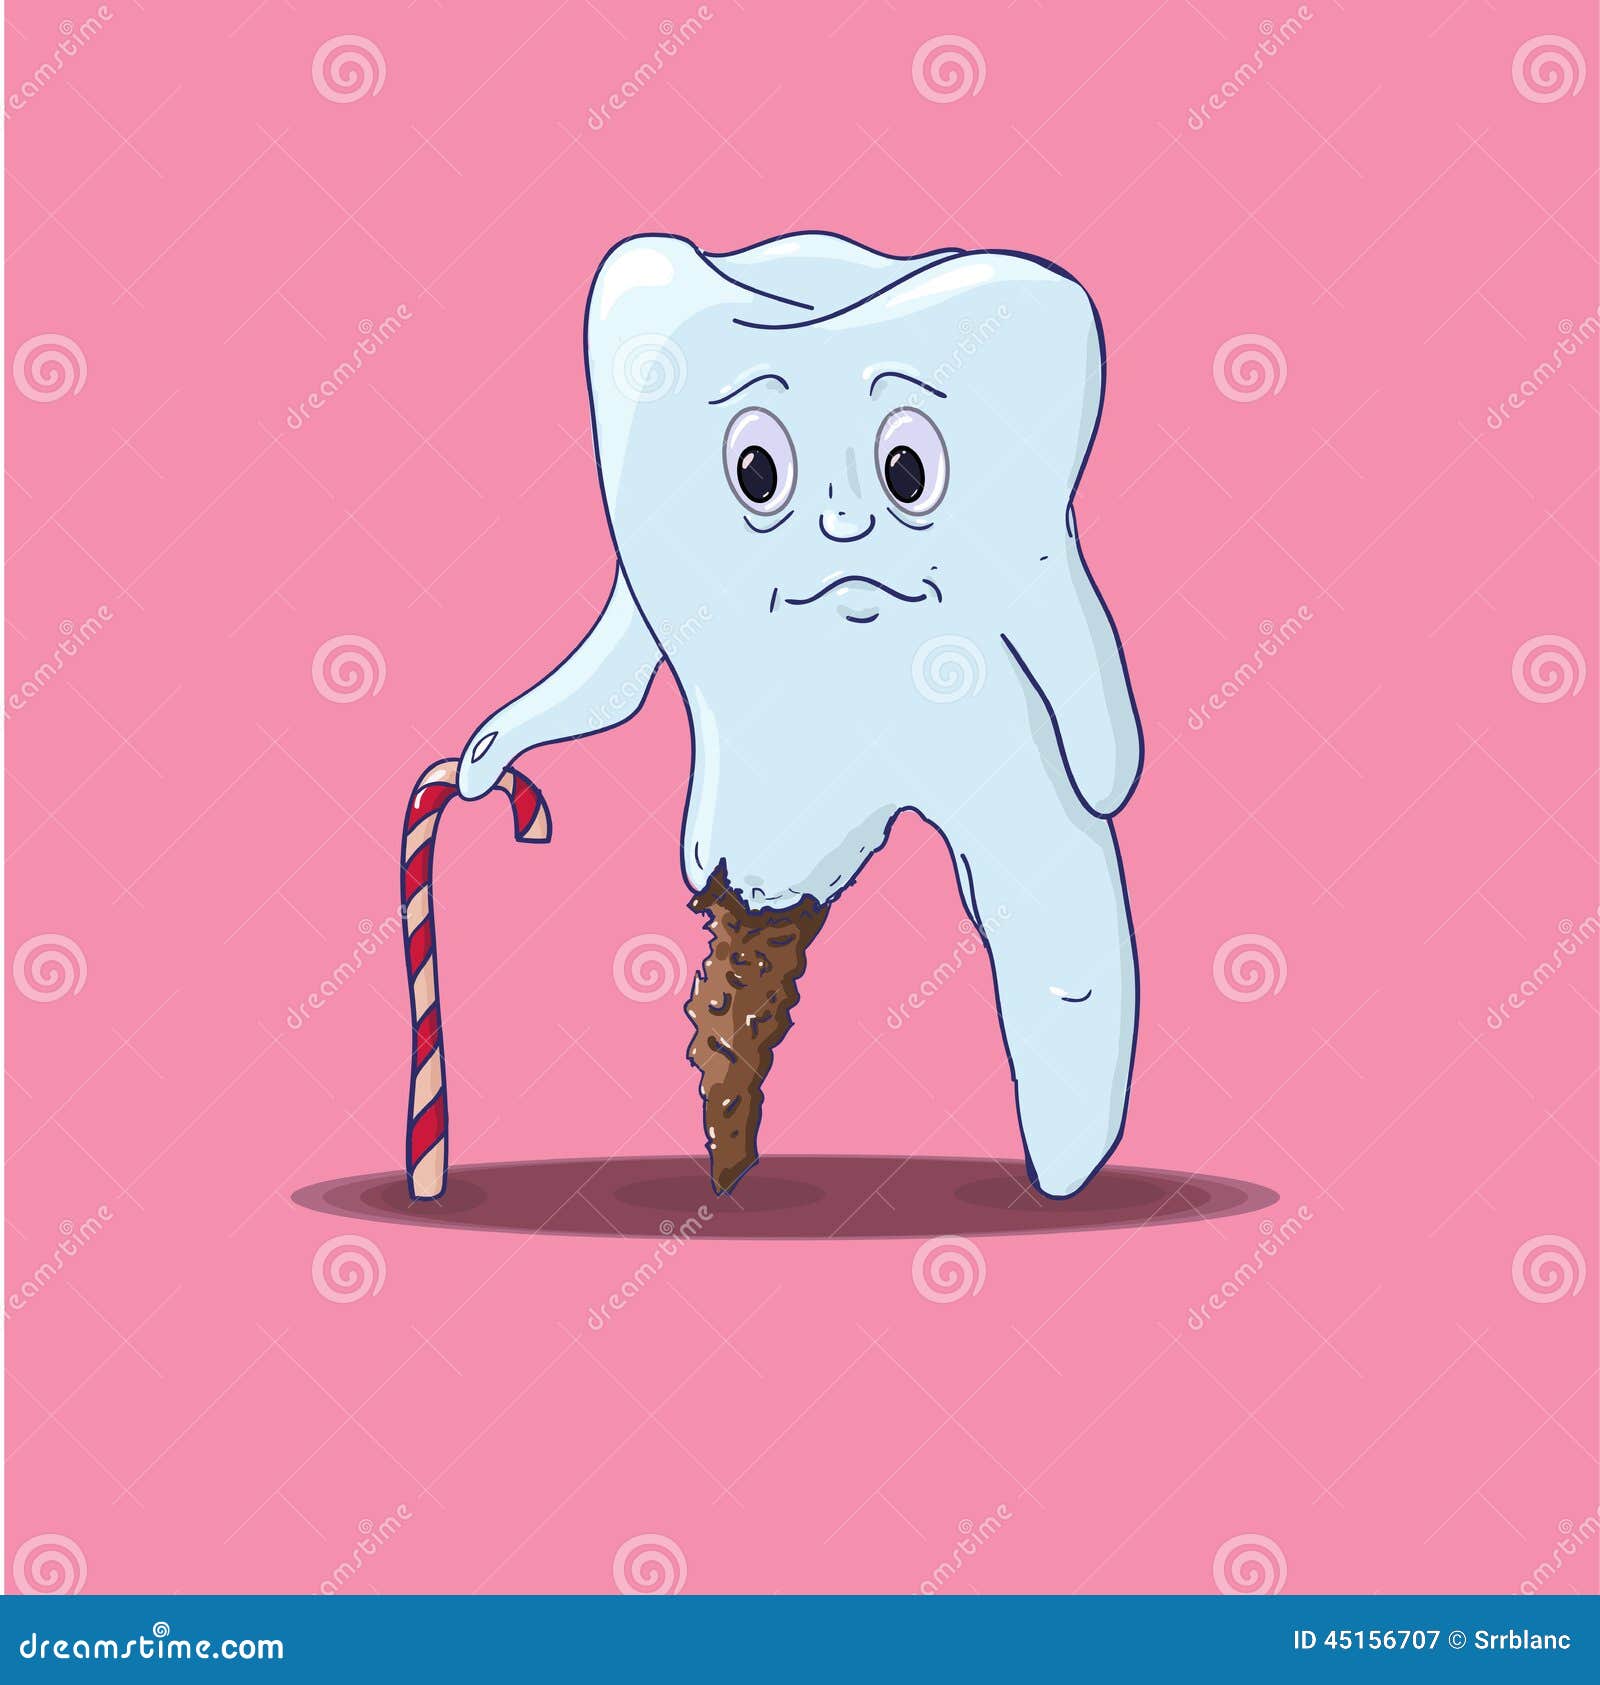 Tooth with a candy cane stock illustration. Illustration of orthodont - 45156707